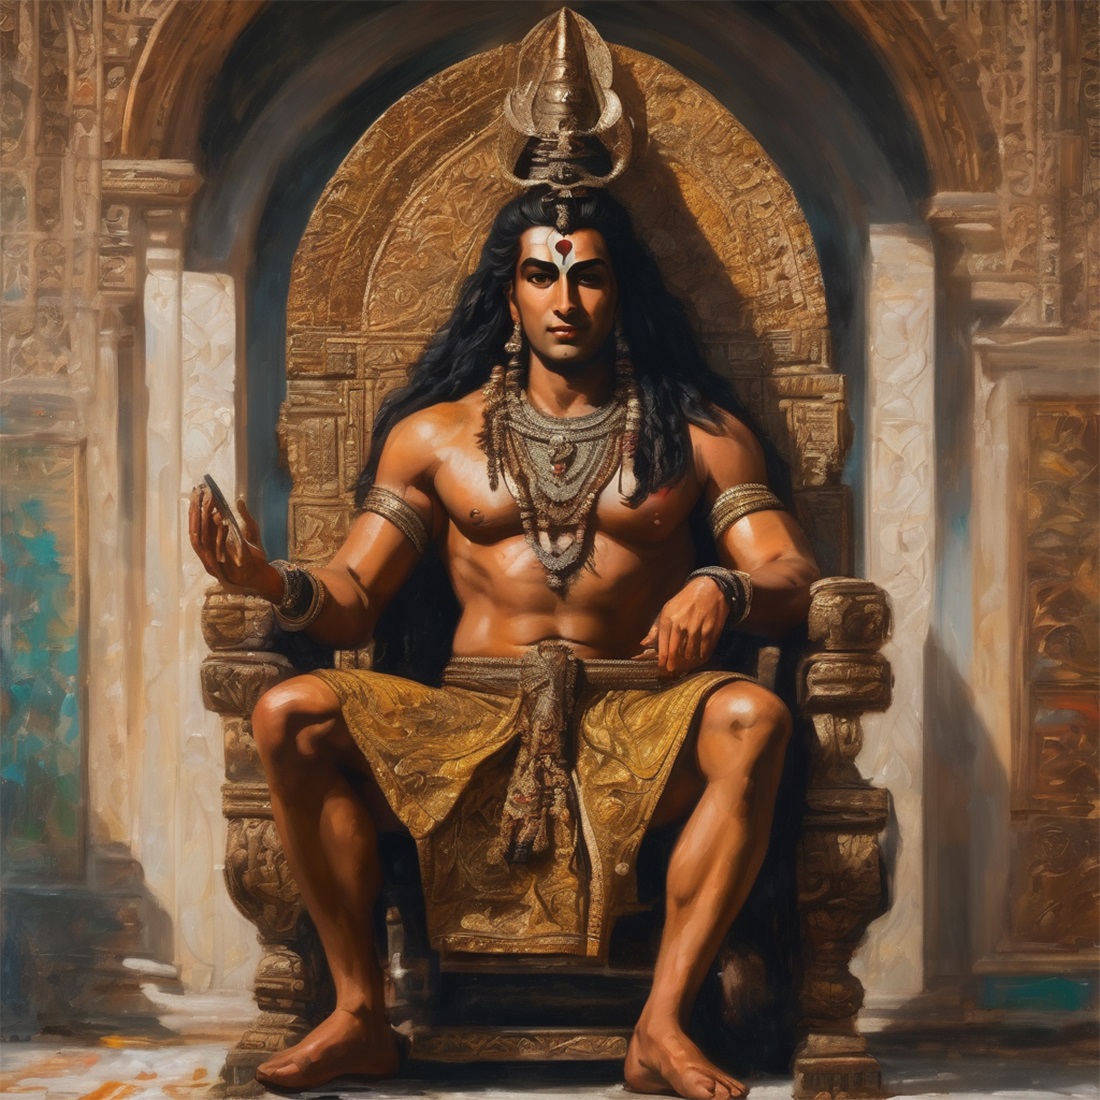 Shiva sitting on stone chair oil painting cover image.